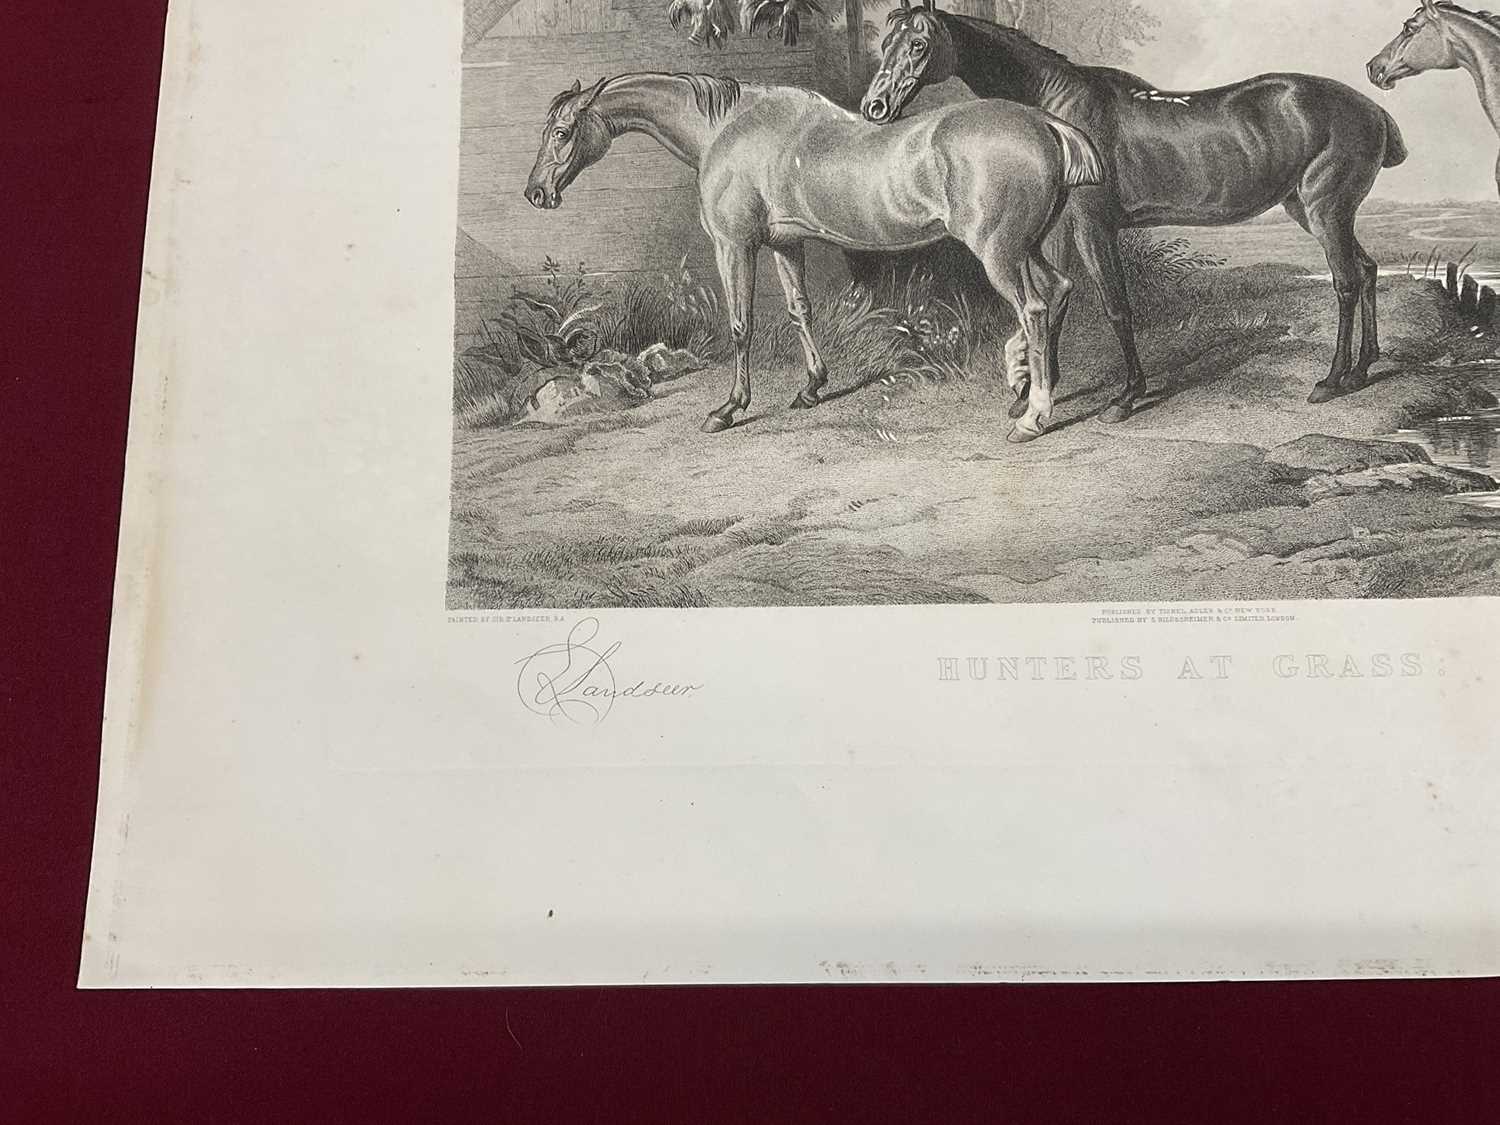 19th century engraving by George Zobel after Sir Edwin Landseer - Hunters at Grass, published by Fis - Image 2 of 6